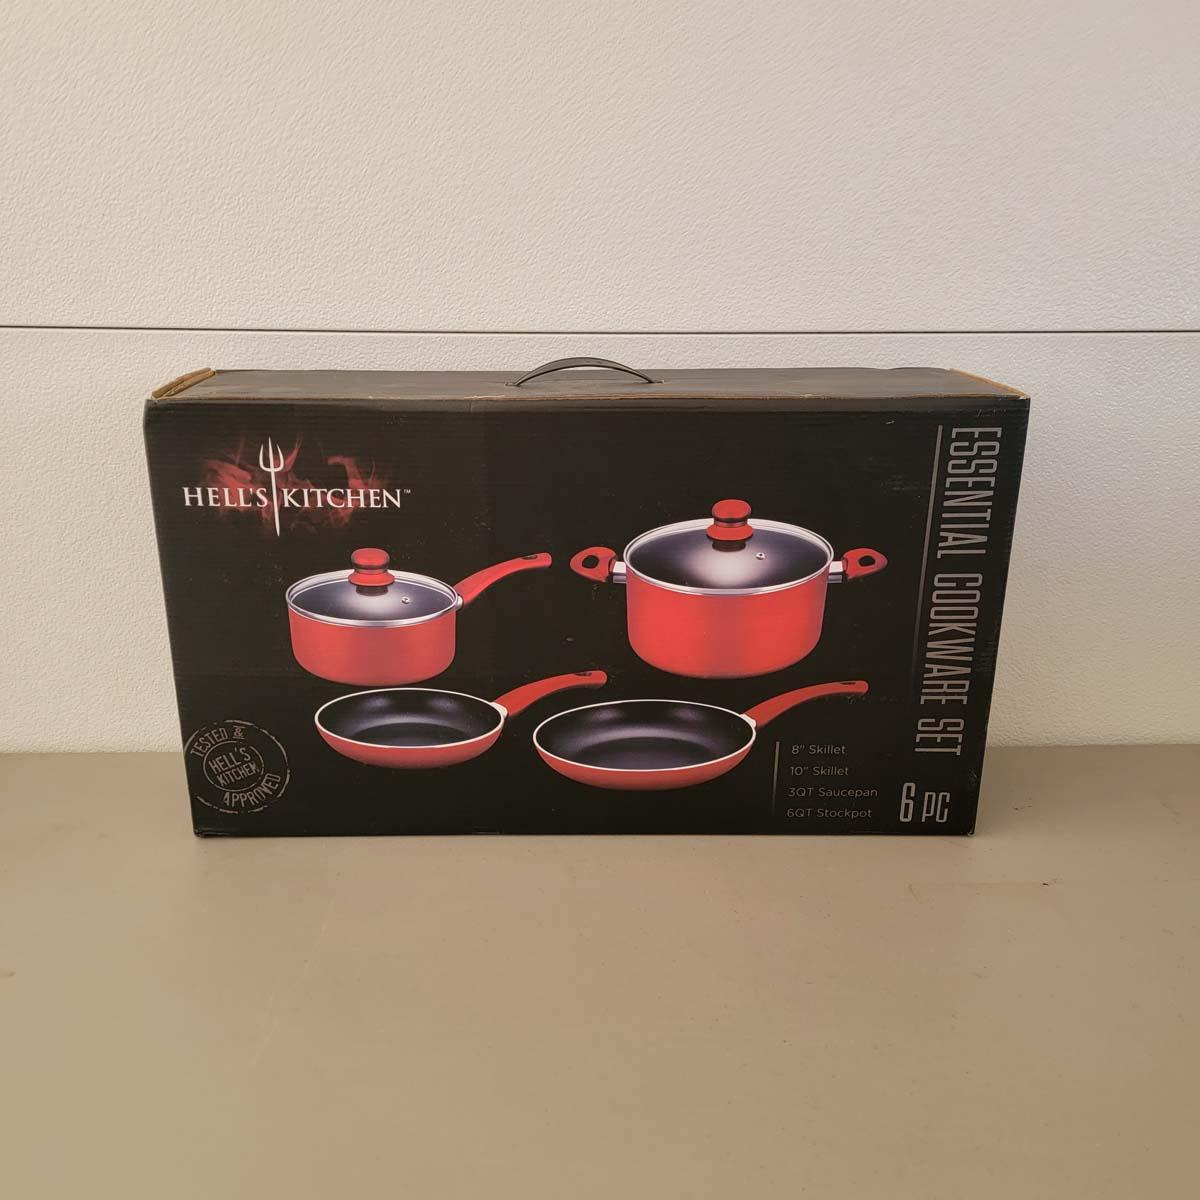 Hell's Kitchen 6 Pc. Essential Cookware Set